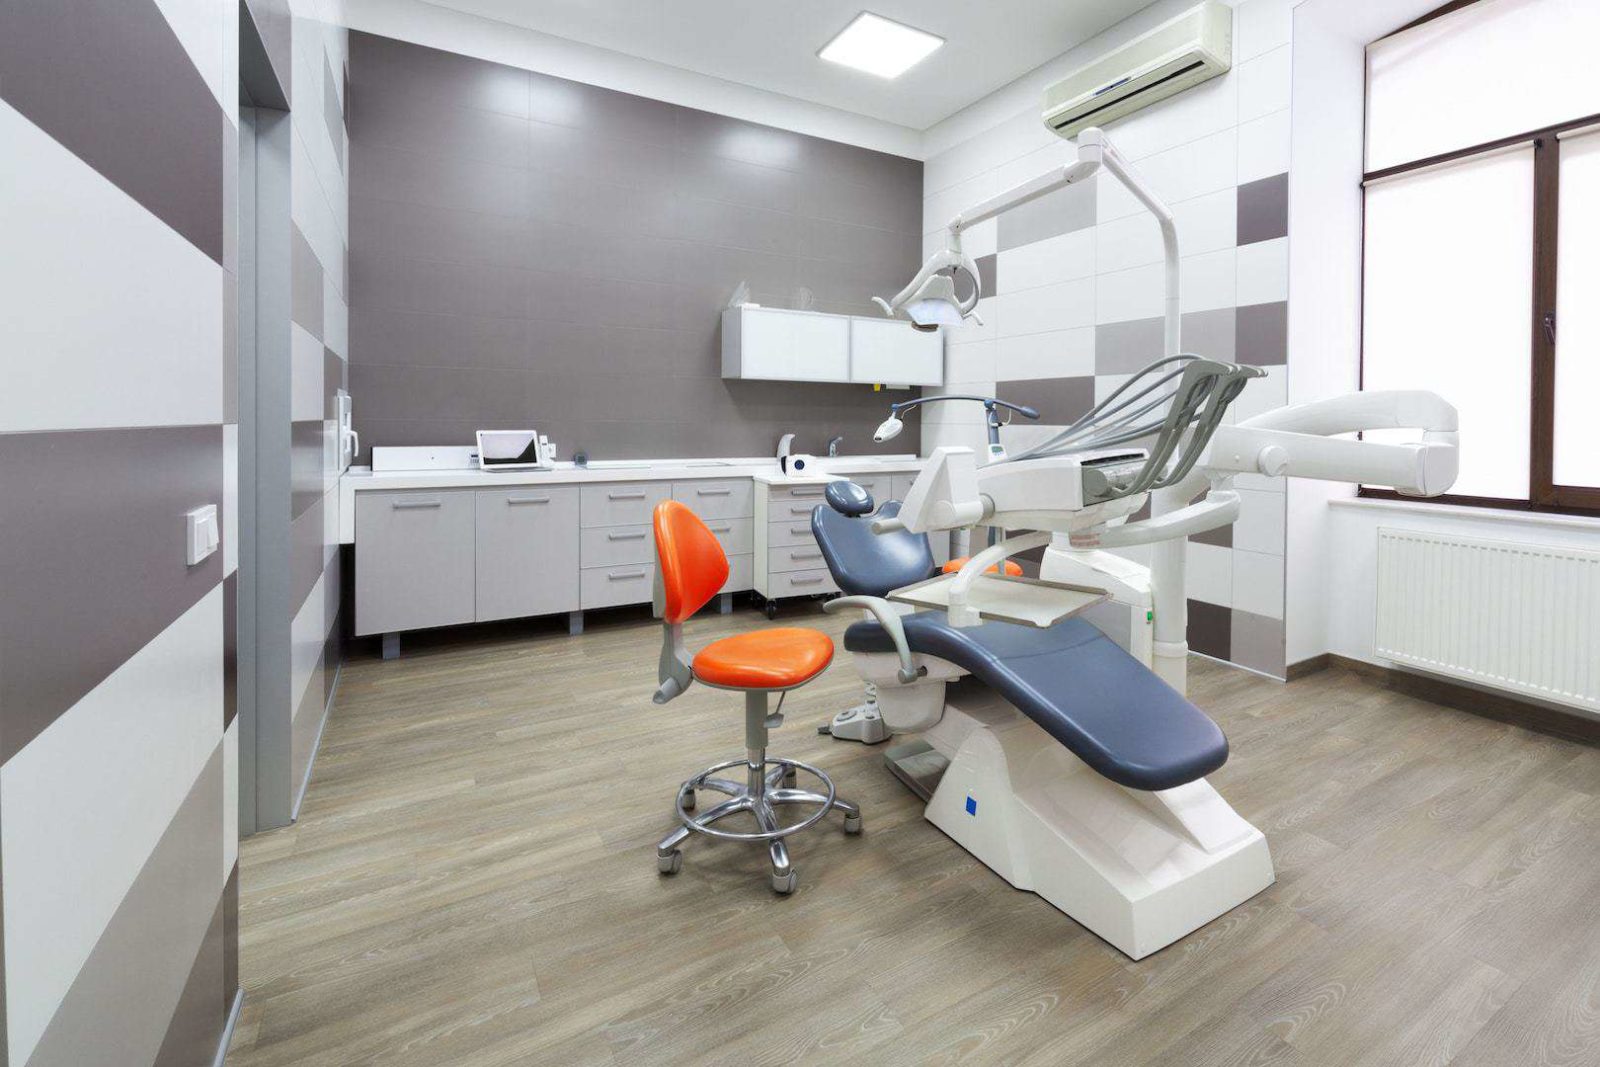 renovating office space includes accent color wall in dental office